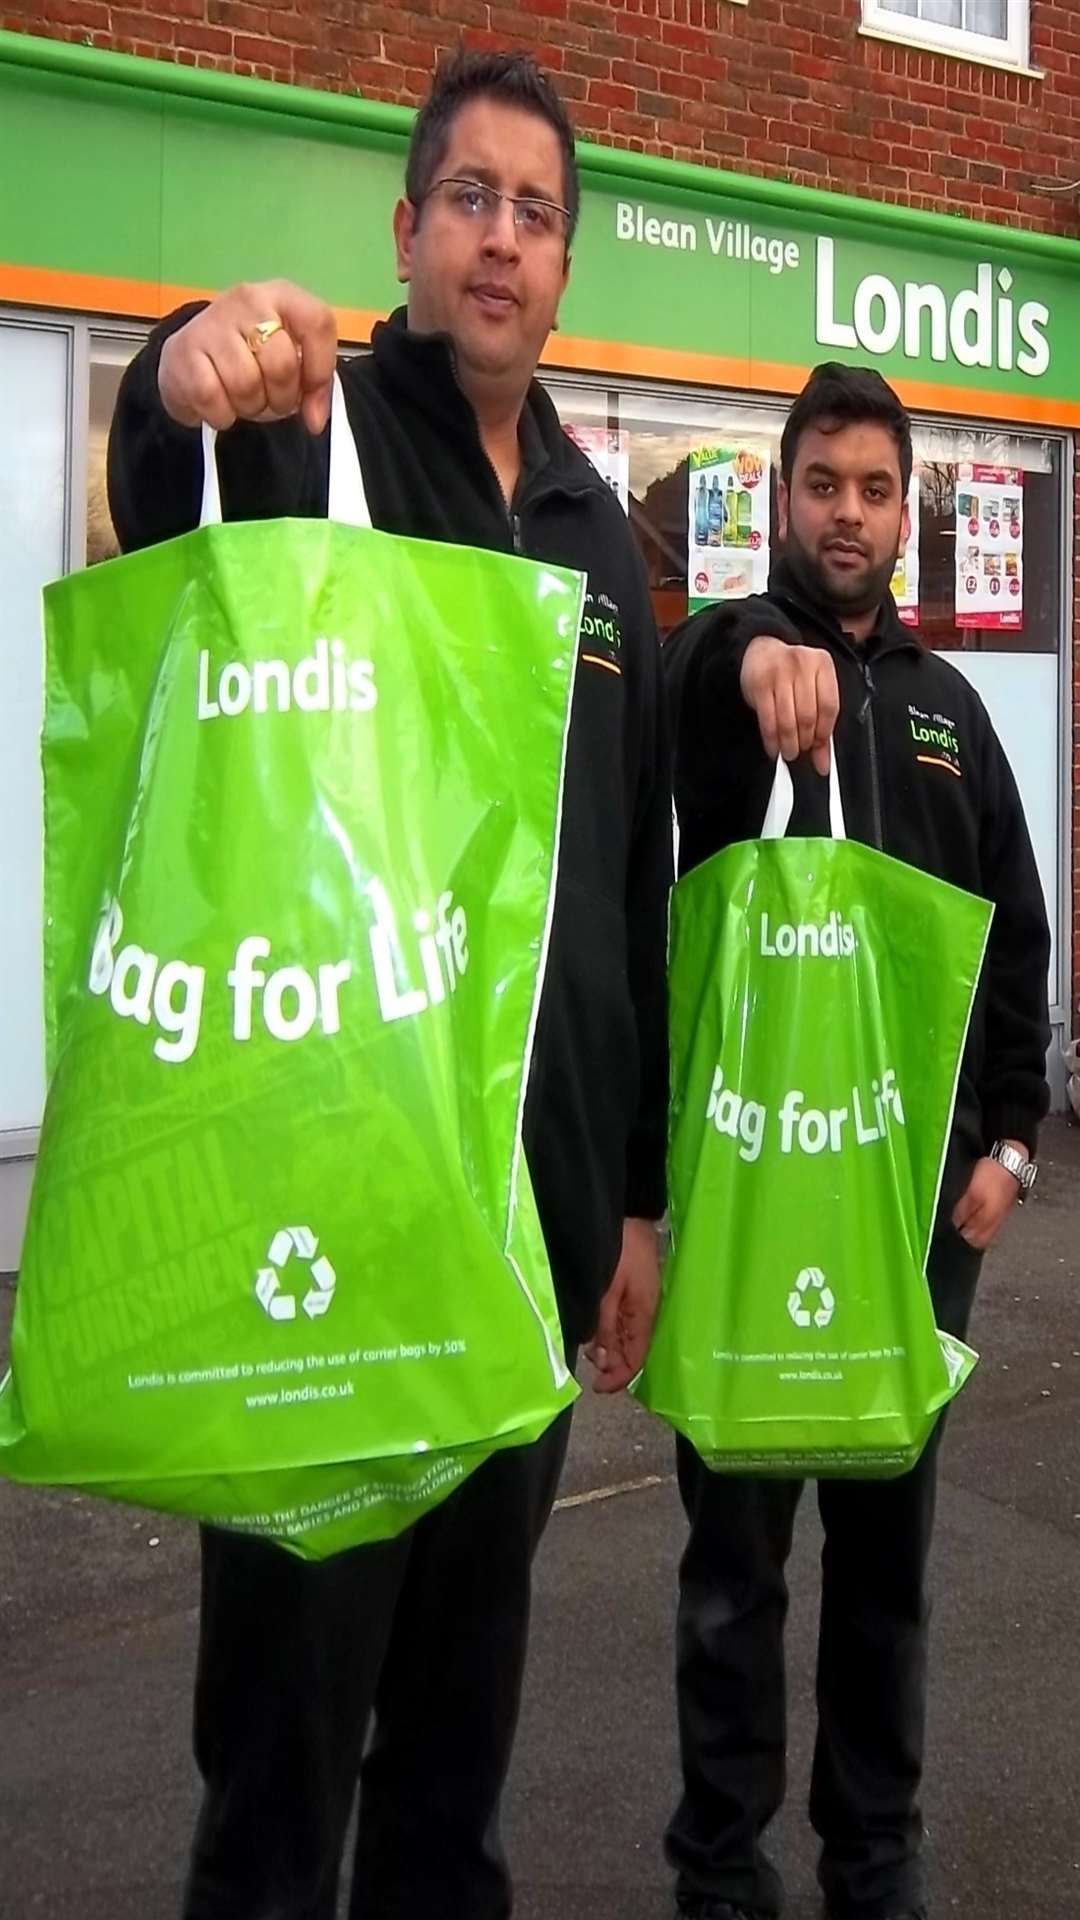 Bintesh Amin (left) and Pinal Amin (right) of Blean Londis are providing goody bags for the Canterbury Big Charity Quiz on Friday, April 24.